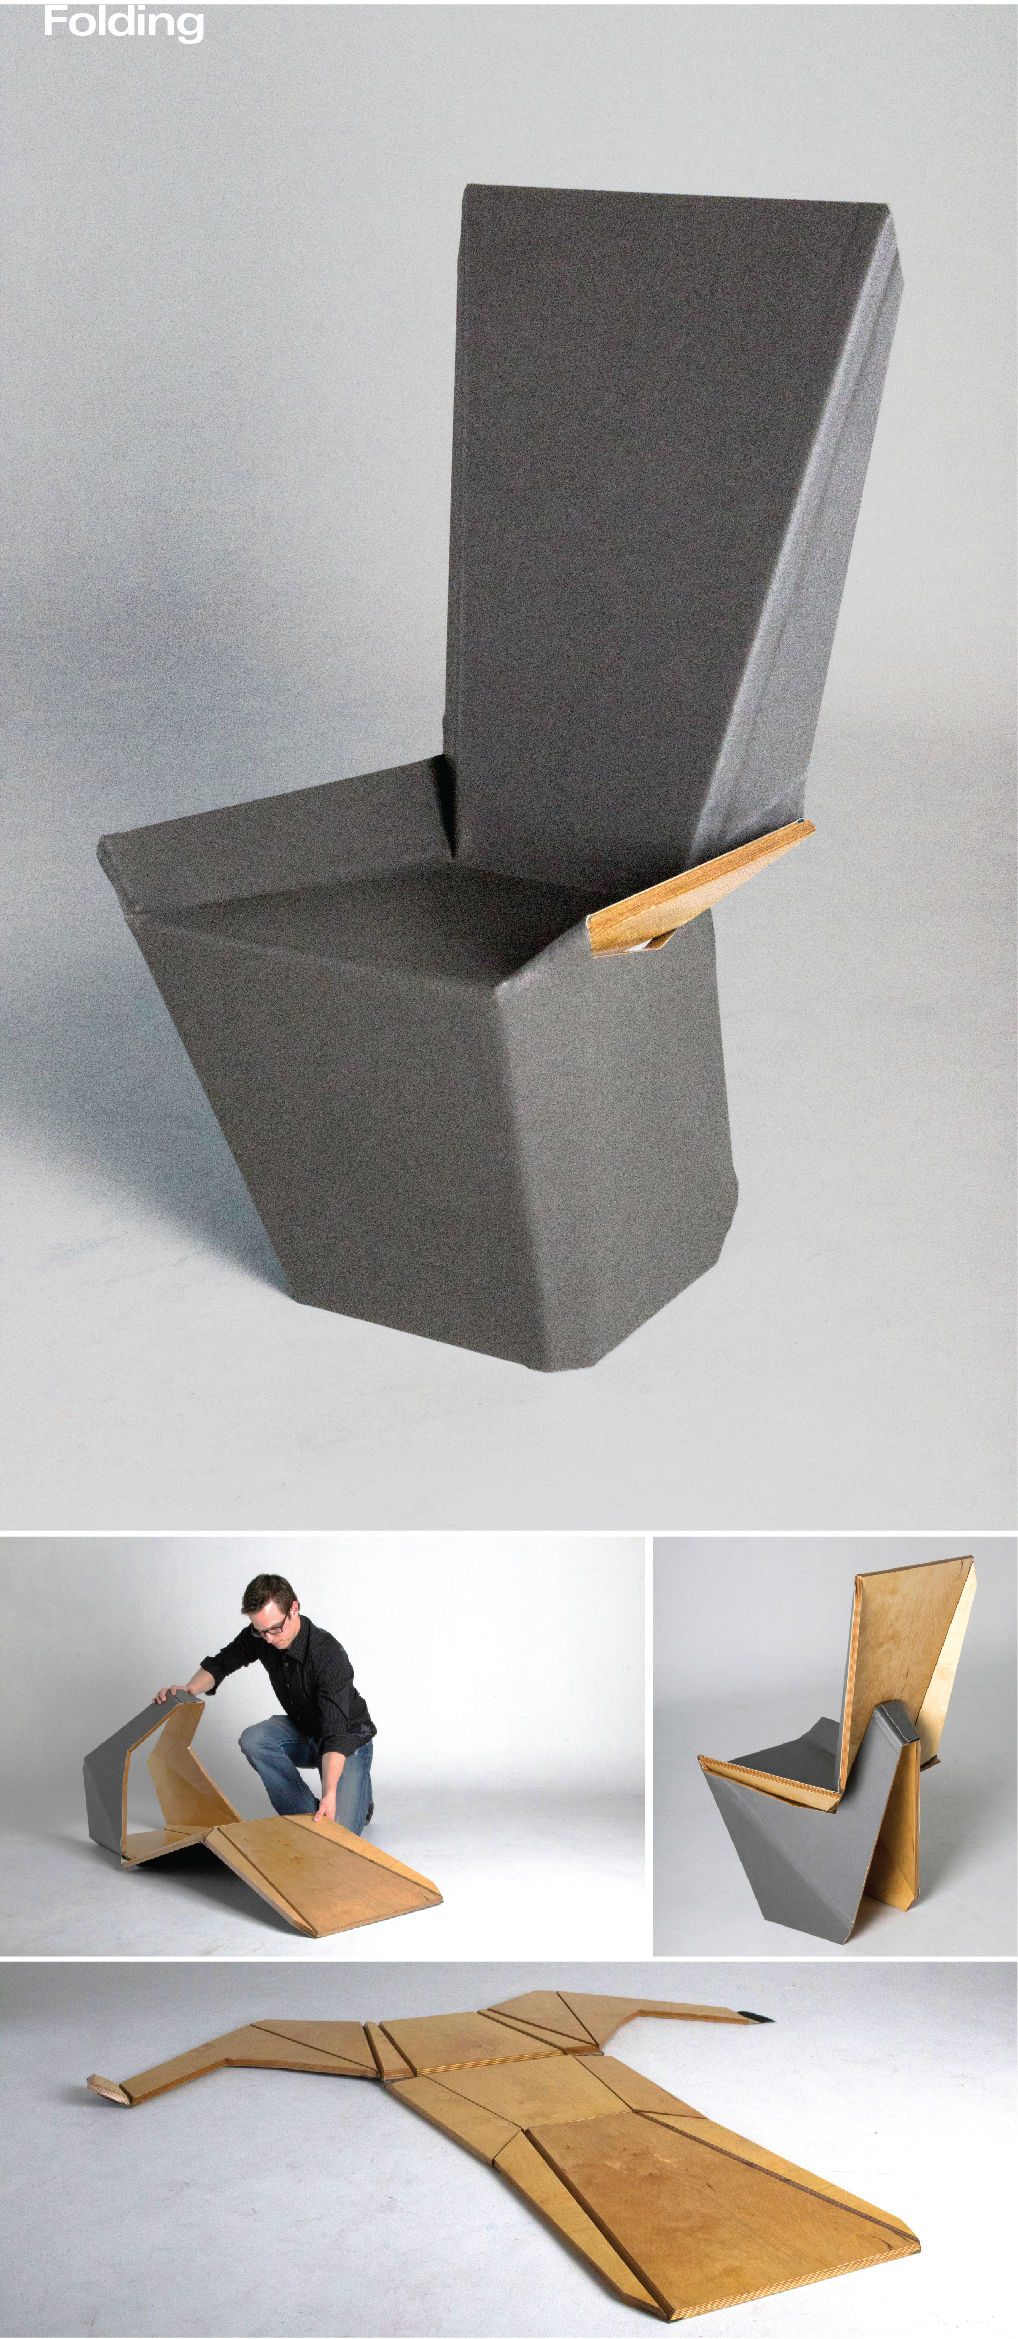 Origami chair folding chair origami pattern folding pattern  faceted chair  Folding Furniture origami furniture  faceted furniture  Living hinge joint Plywood folding chair origami  folding